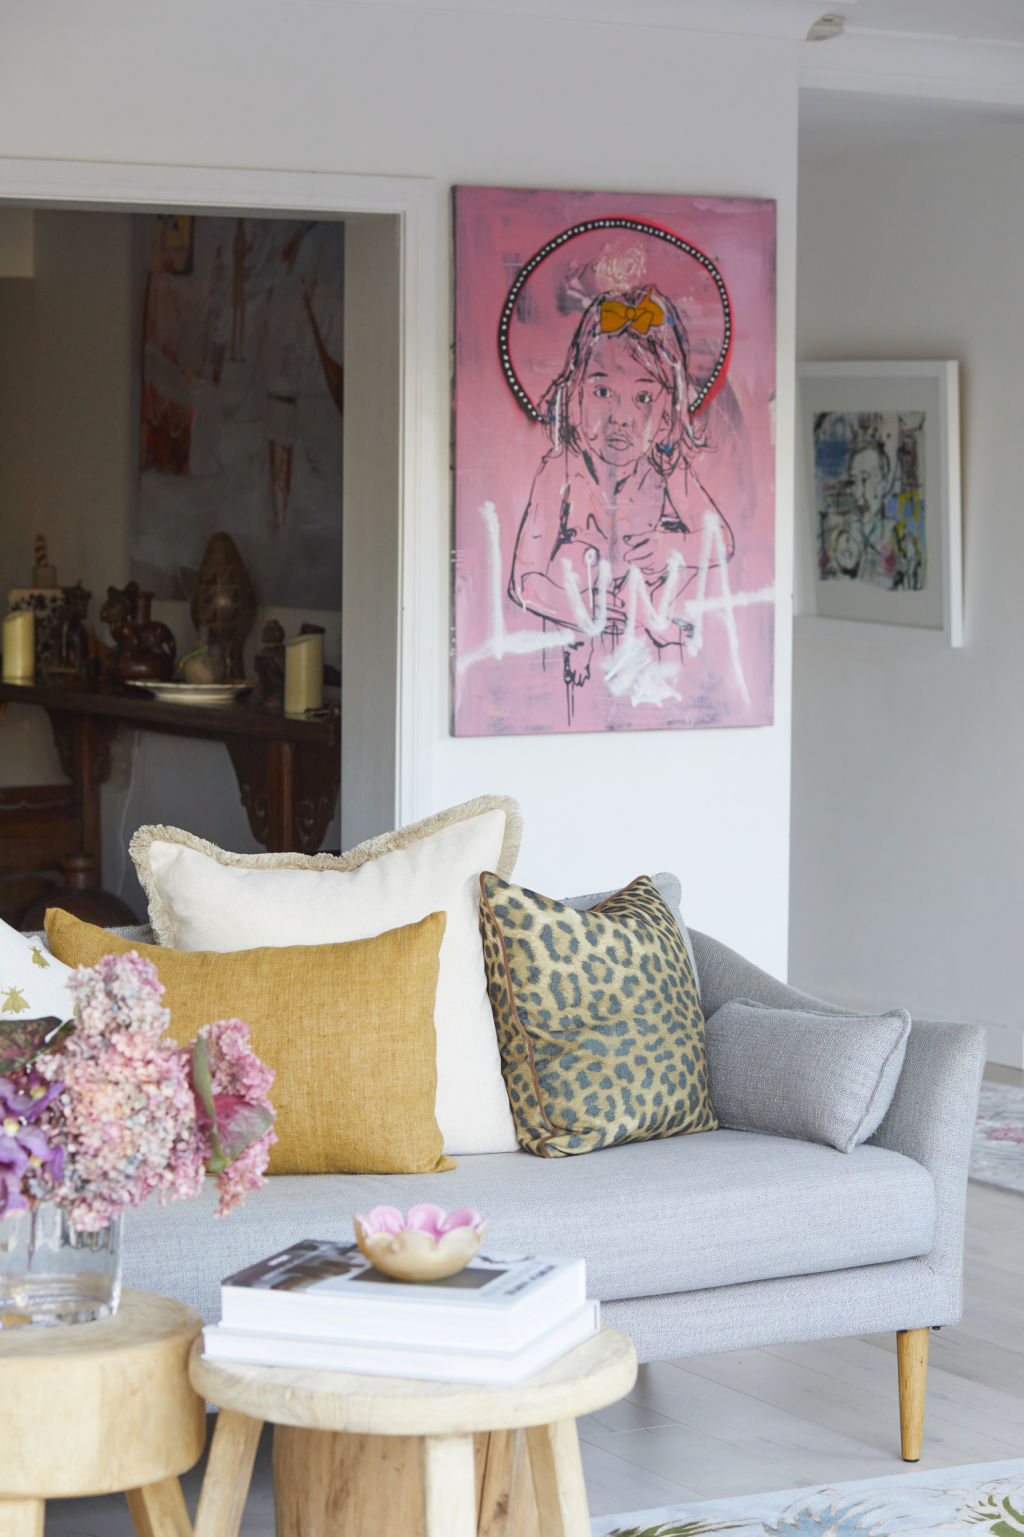 A portrait of daughter Luna hangs proudly in the living area. Photo: Nicky Ryan